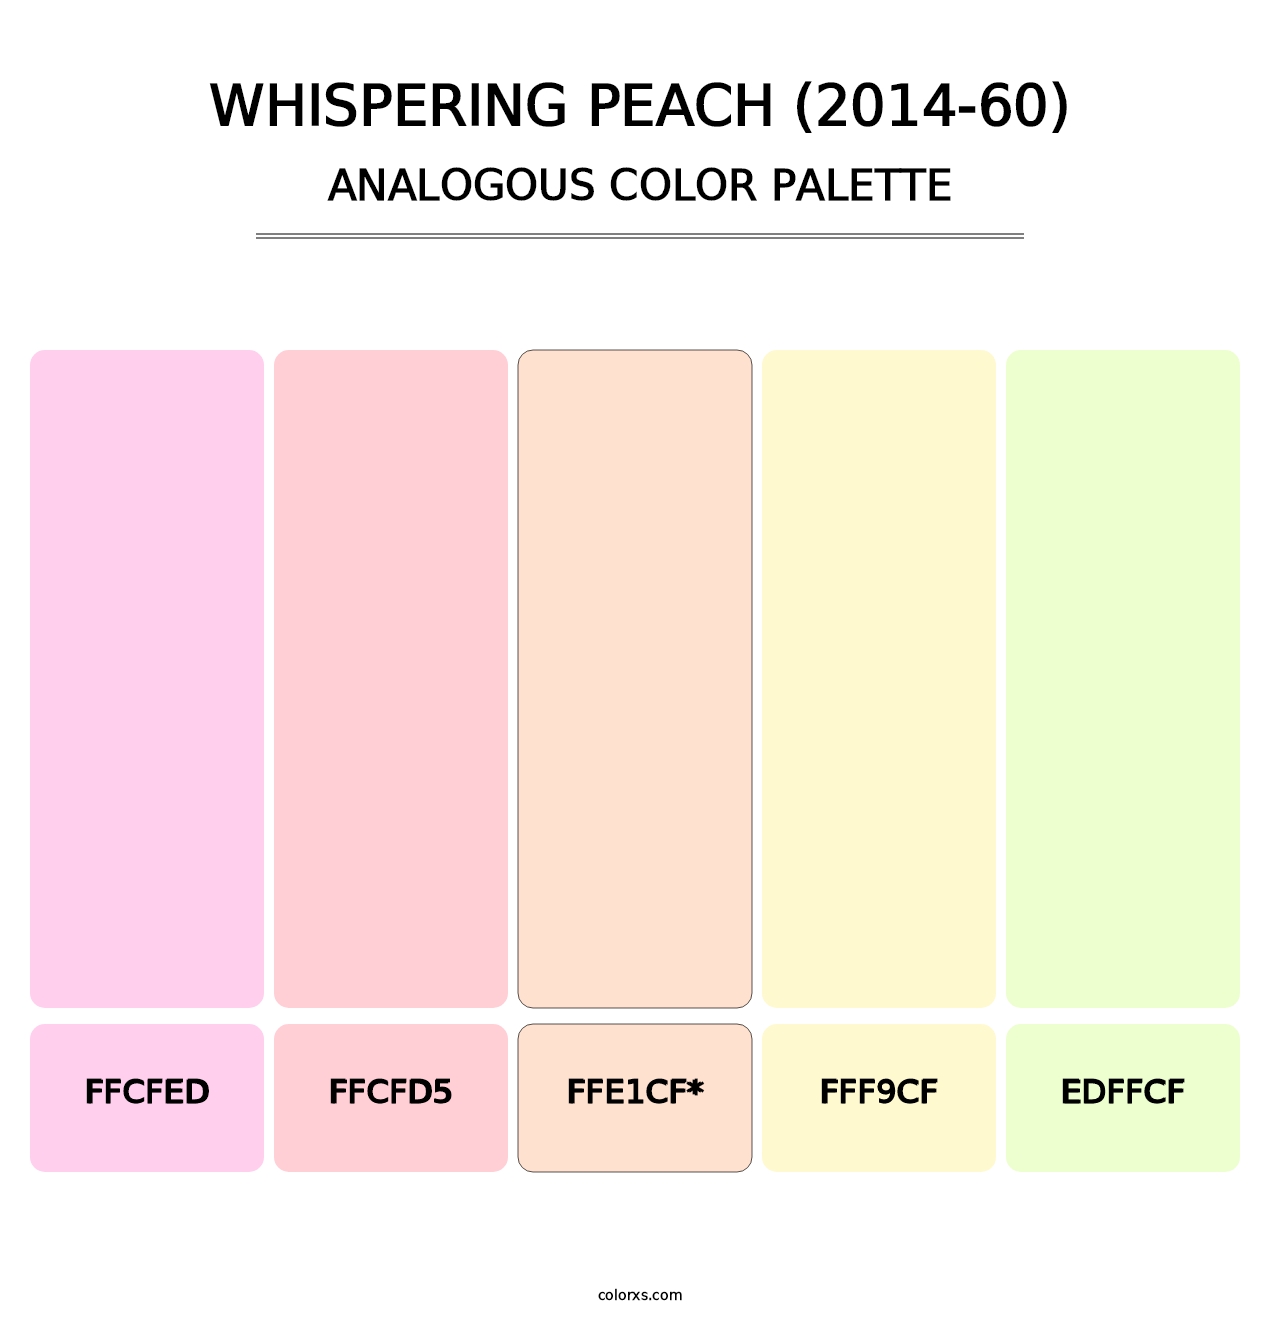 Whispering Peach (2014-60) - Analogous Color Palette